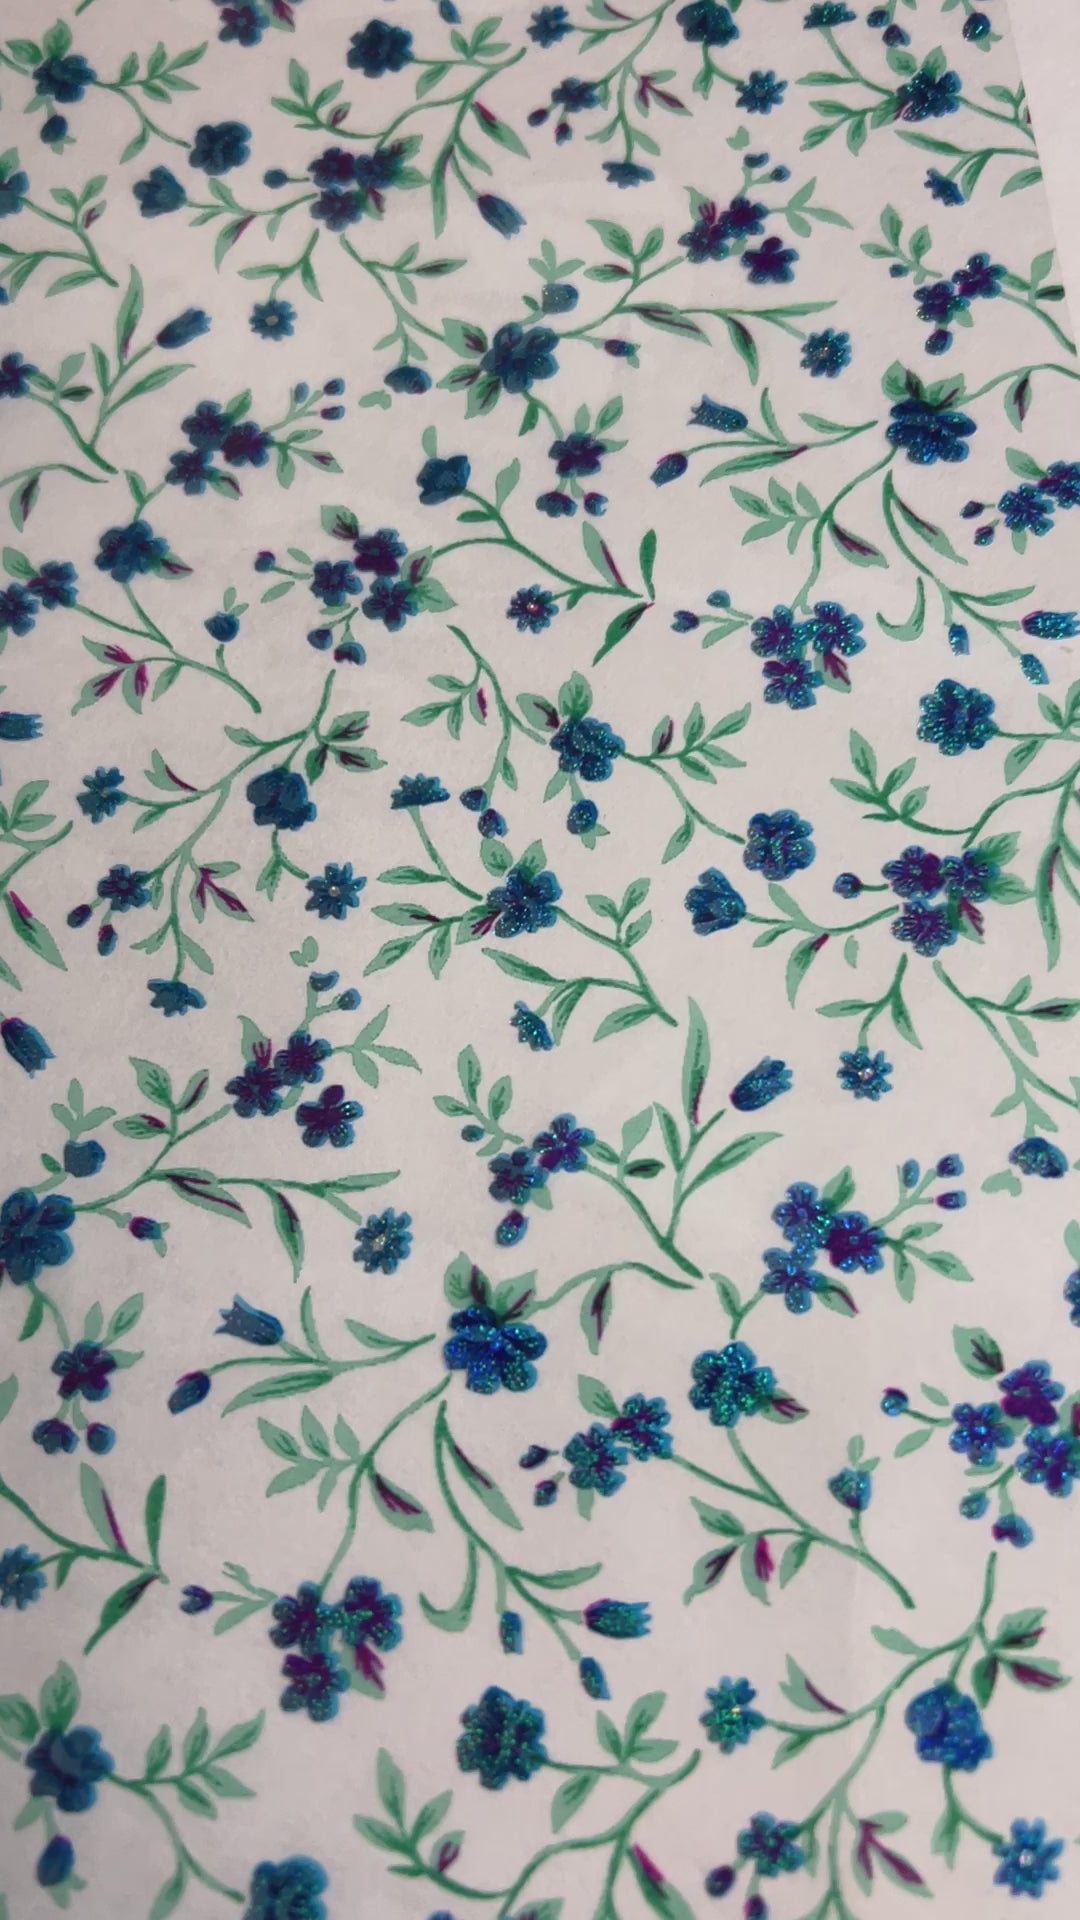 A video of a roll of blue floral transparent transfer foil